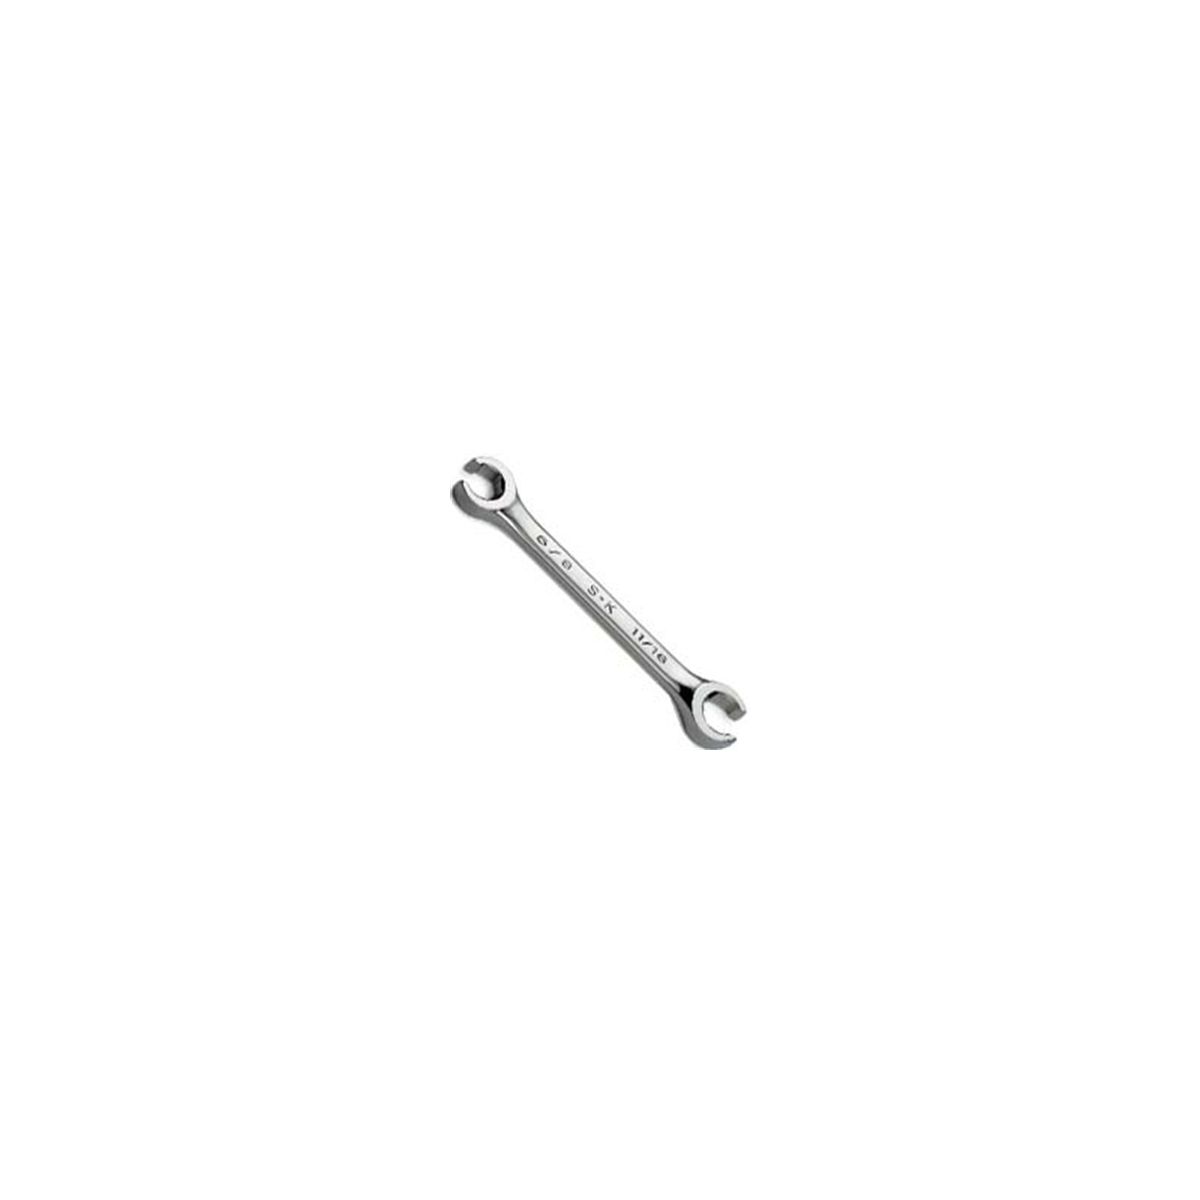 SuperKrome(R) Standard Flare Nut Wrench - 5/8 In x 3/4 In